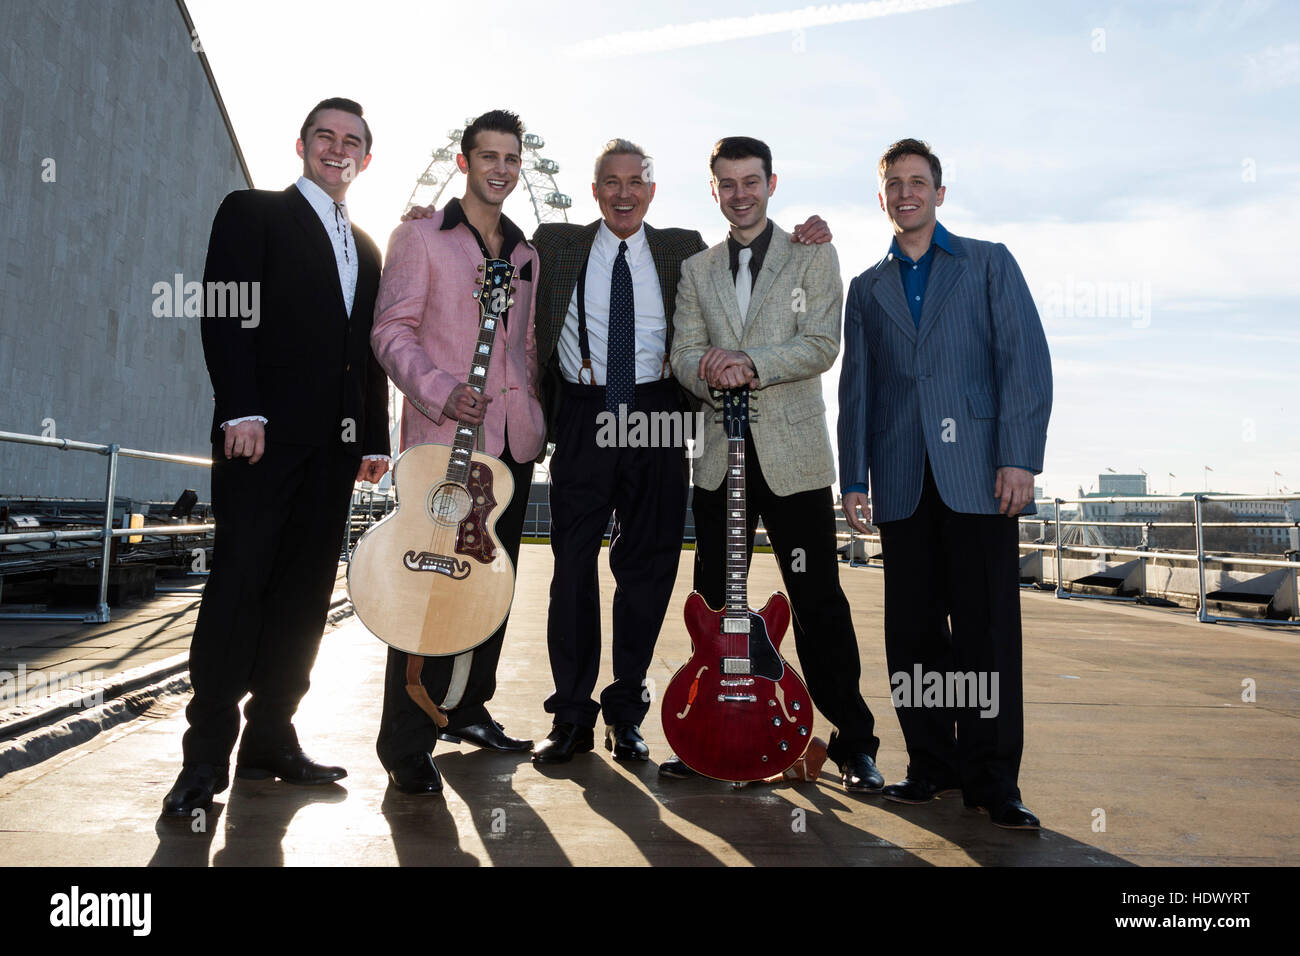 Photocall with Martin Kemp, formerly of Spandau Ballet, who stars in Million Dollar Quartet at the Royal Festival Hall in London until 2 January 2017. Stock Photo